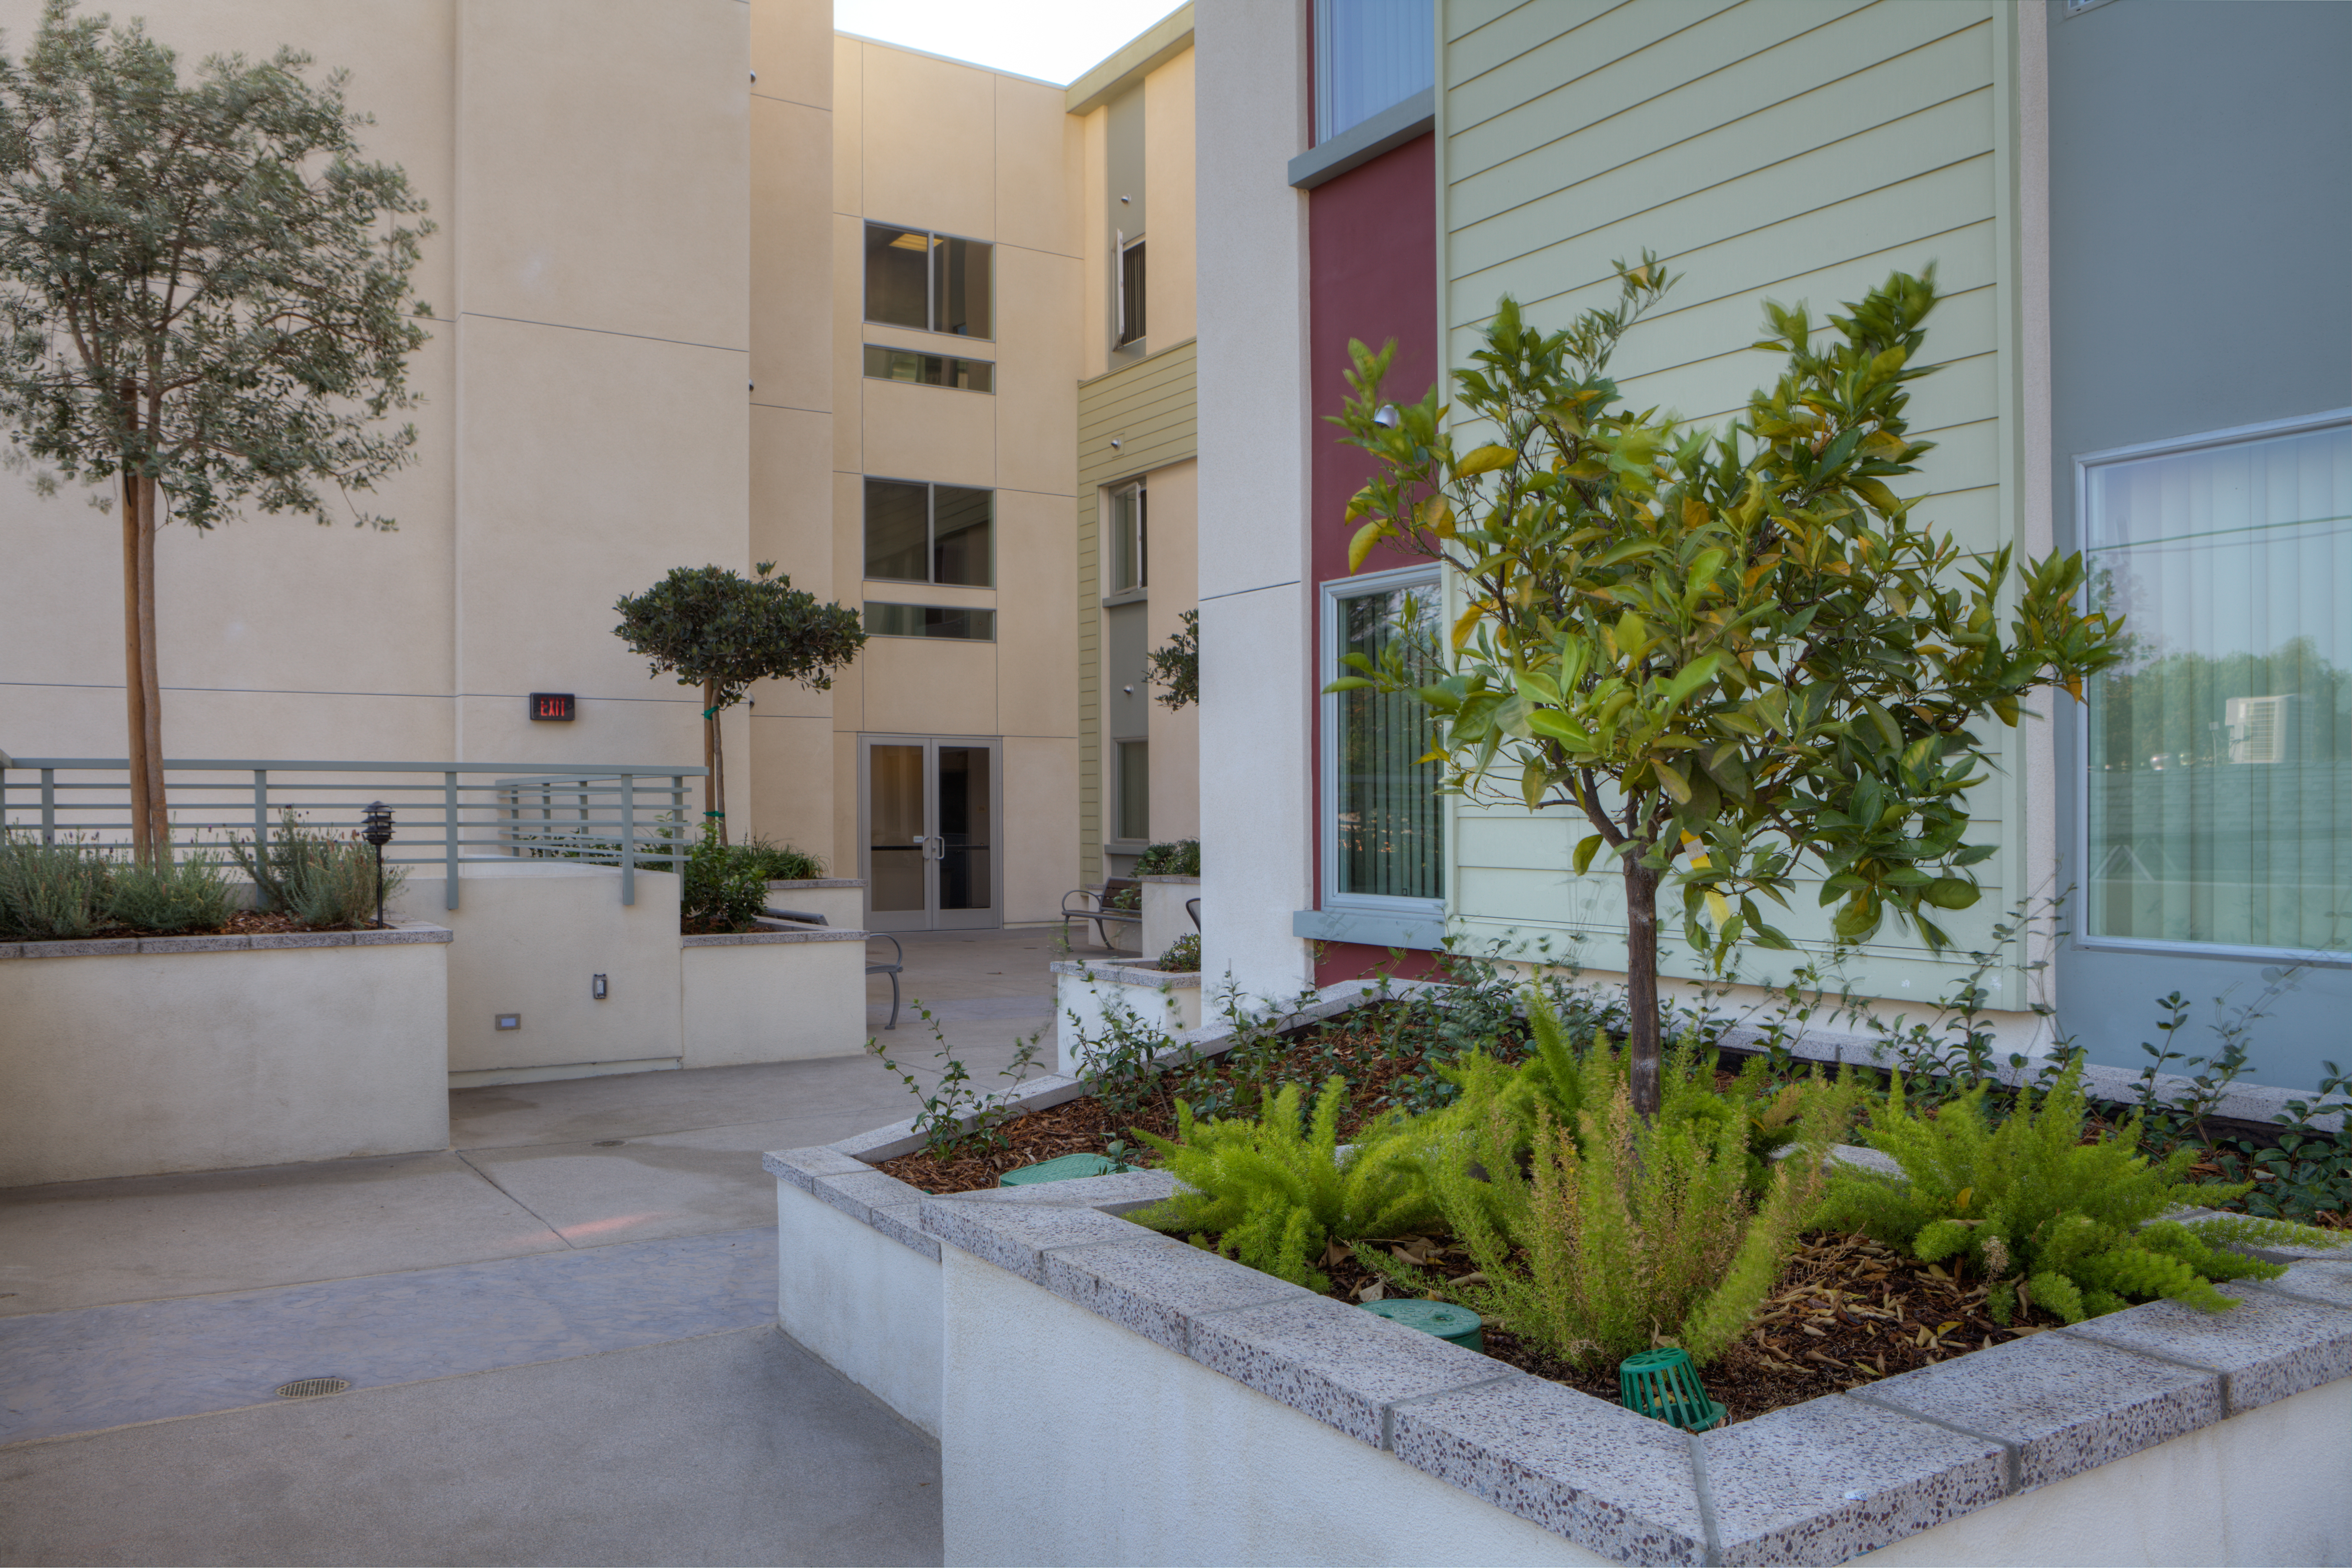 Exterior view of a patio at Vineland Senior Housing, with landscaping in large planters